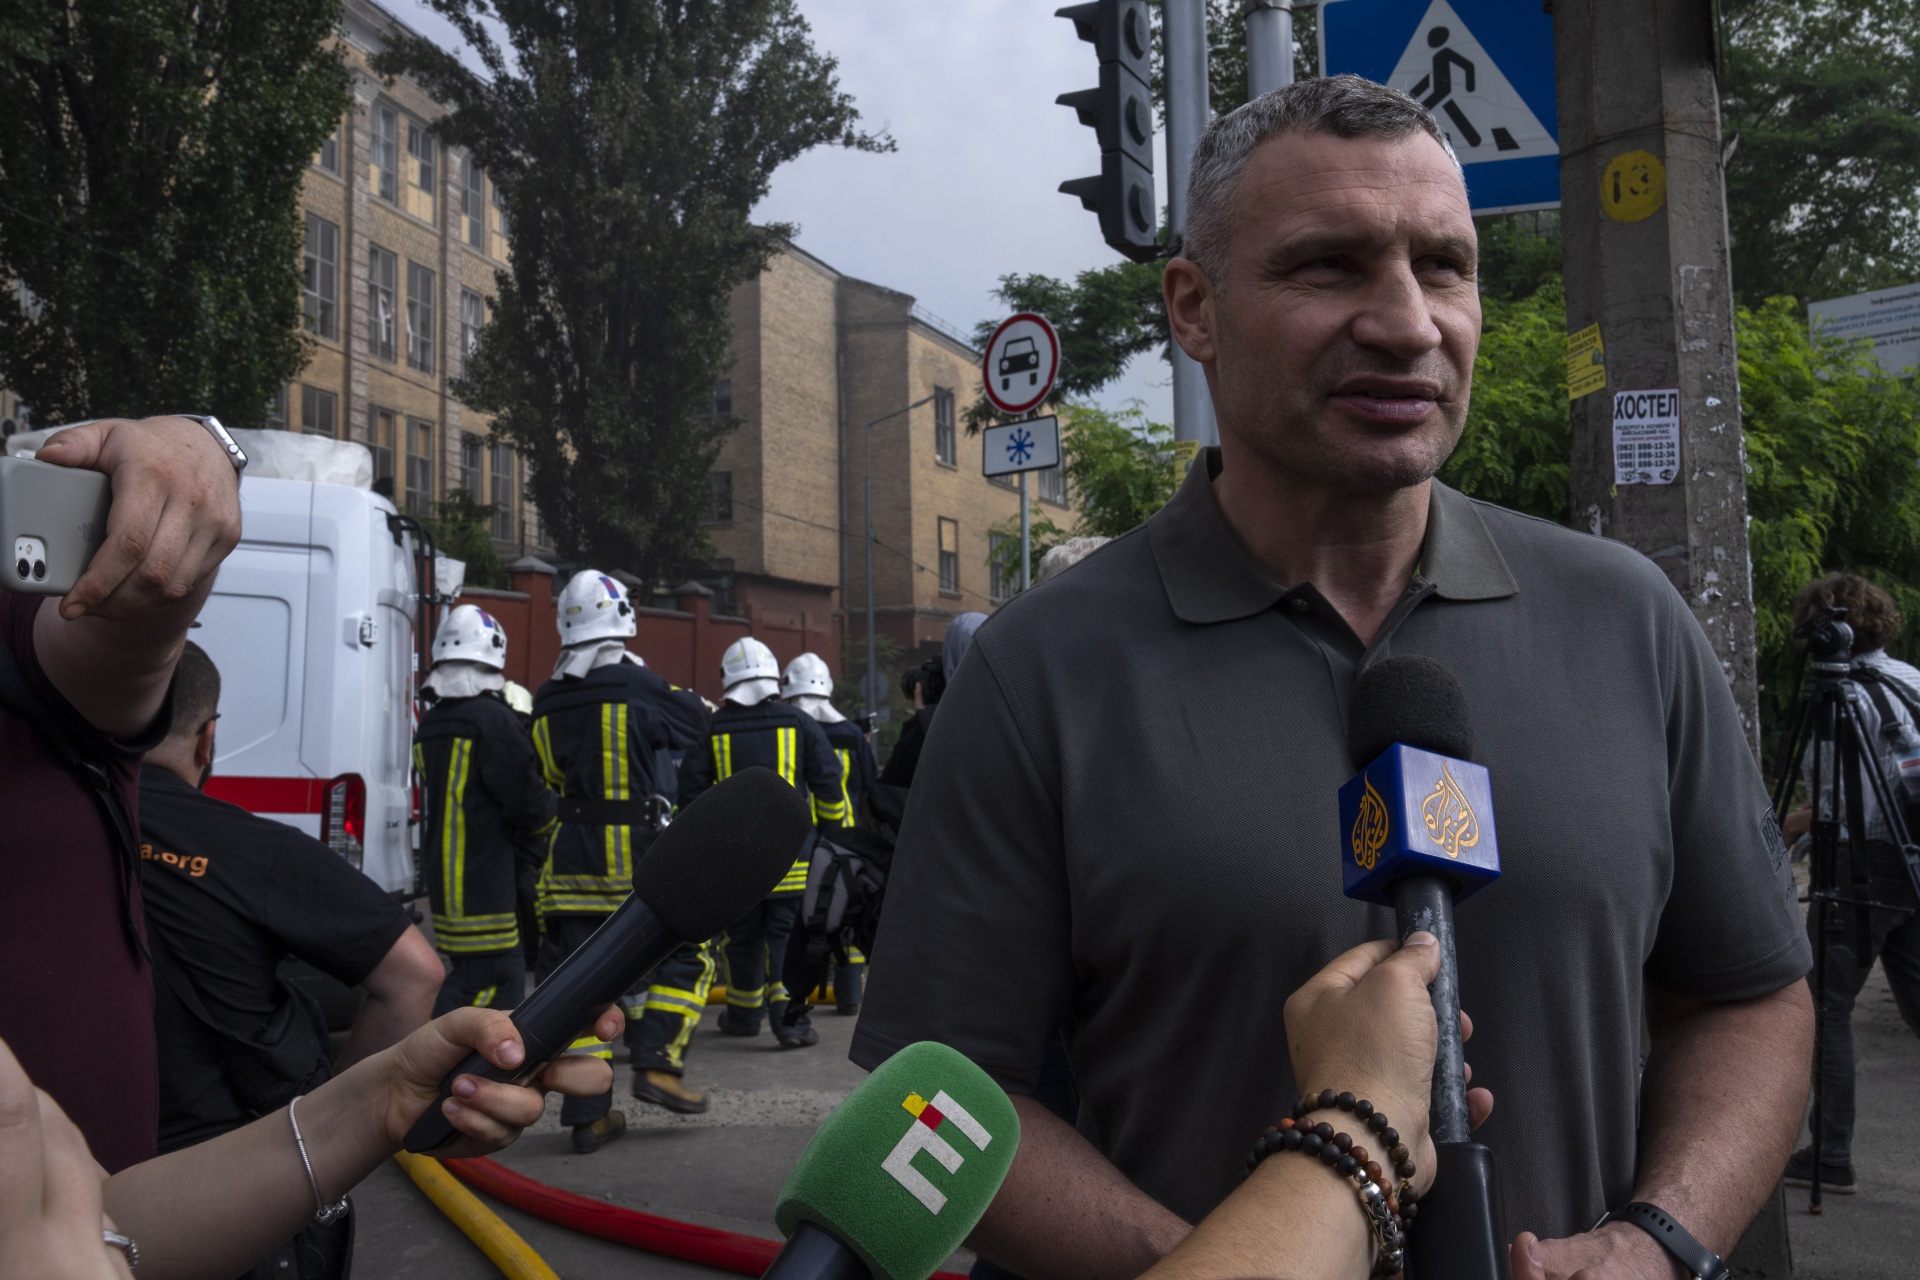 Kyiv mayor Vitali Klitschko speaks to the press at the scene of a residential building following explosions, in Kyiv, Ukraine, Sunday, June 26, 2022. Several explosions rocked the west of the Ukrainian capital in the early hours of Sunday morning, with at least two residential buildings struck, according to Klitschko. (AP Photo/Nariman El-Mofty)